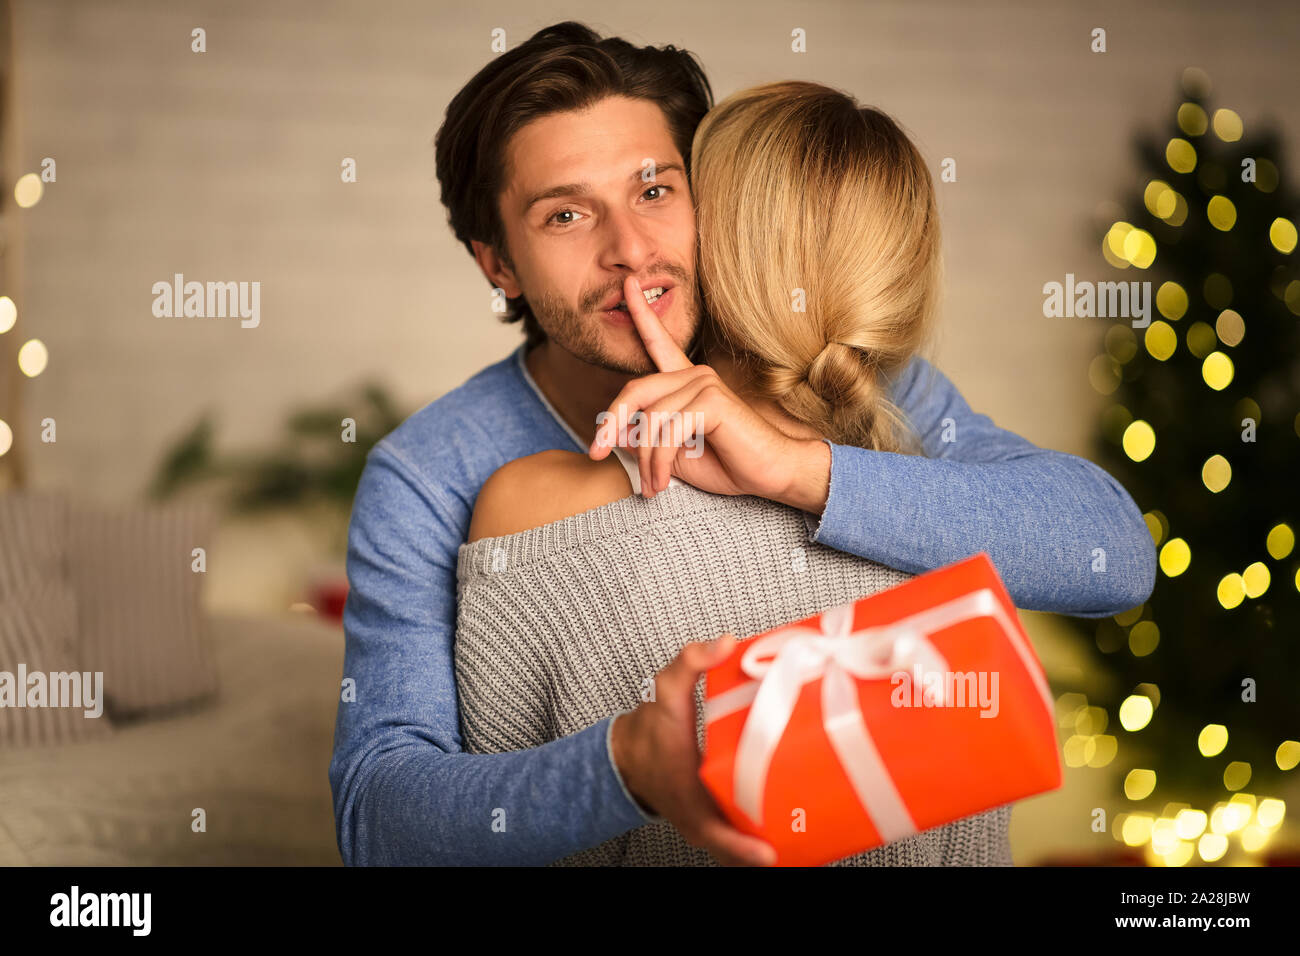 New Year surprise. Man making silence gesture and embracing woman Stock Photo